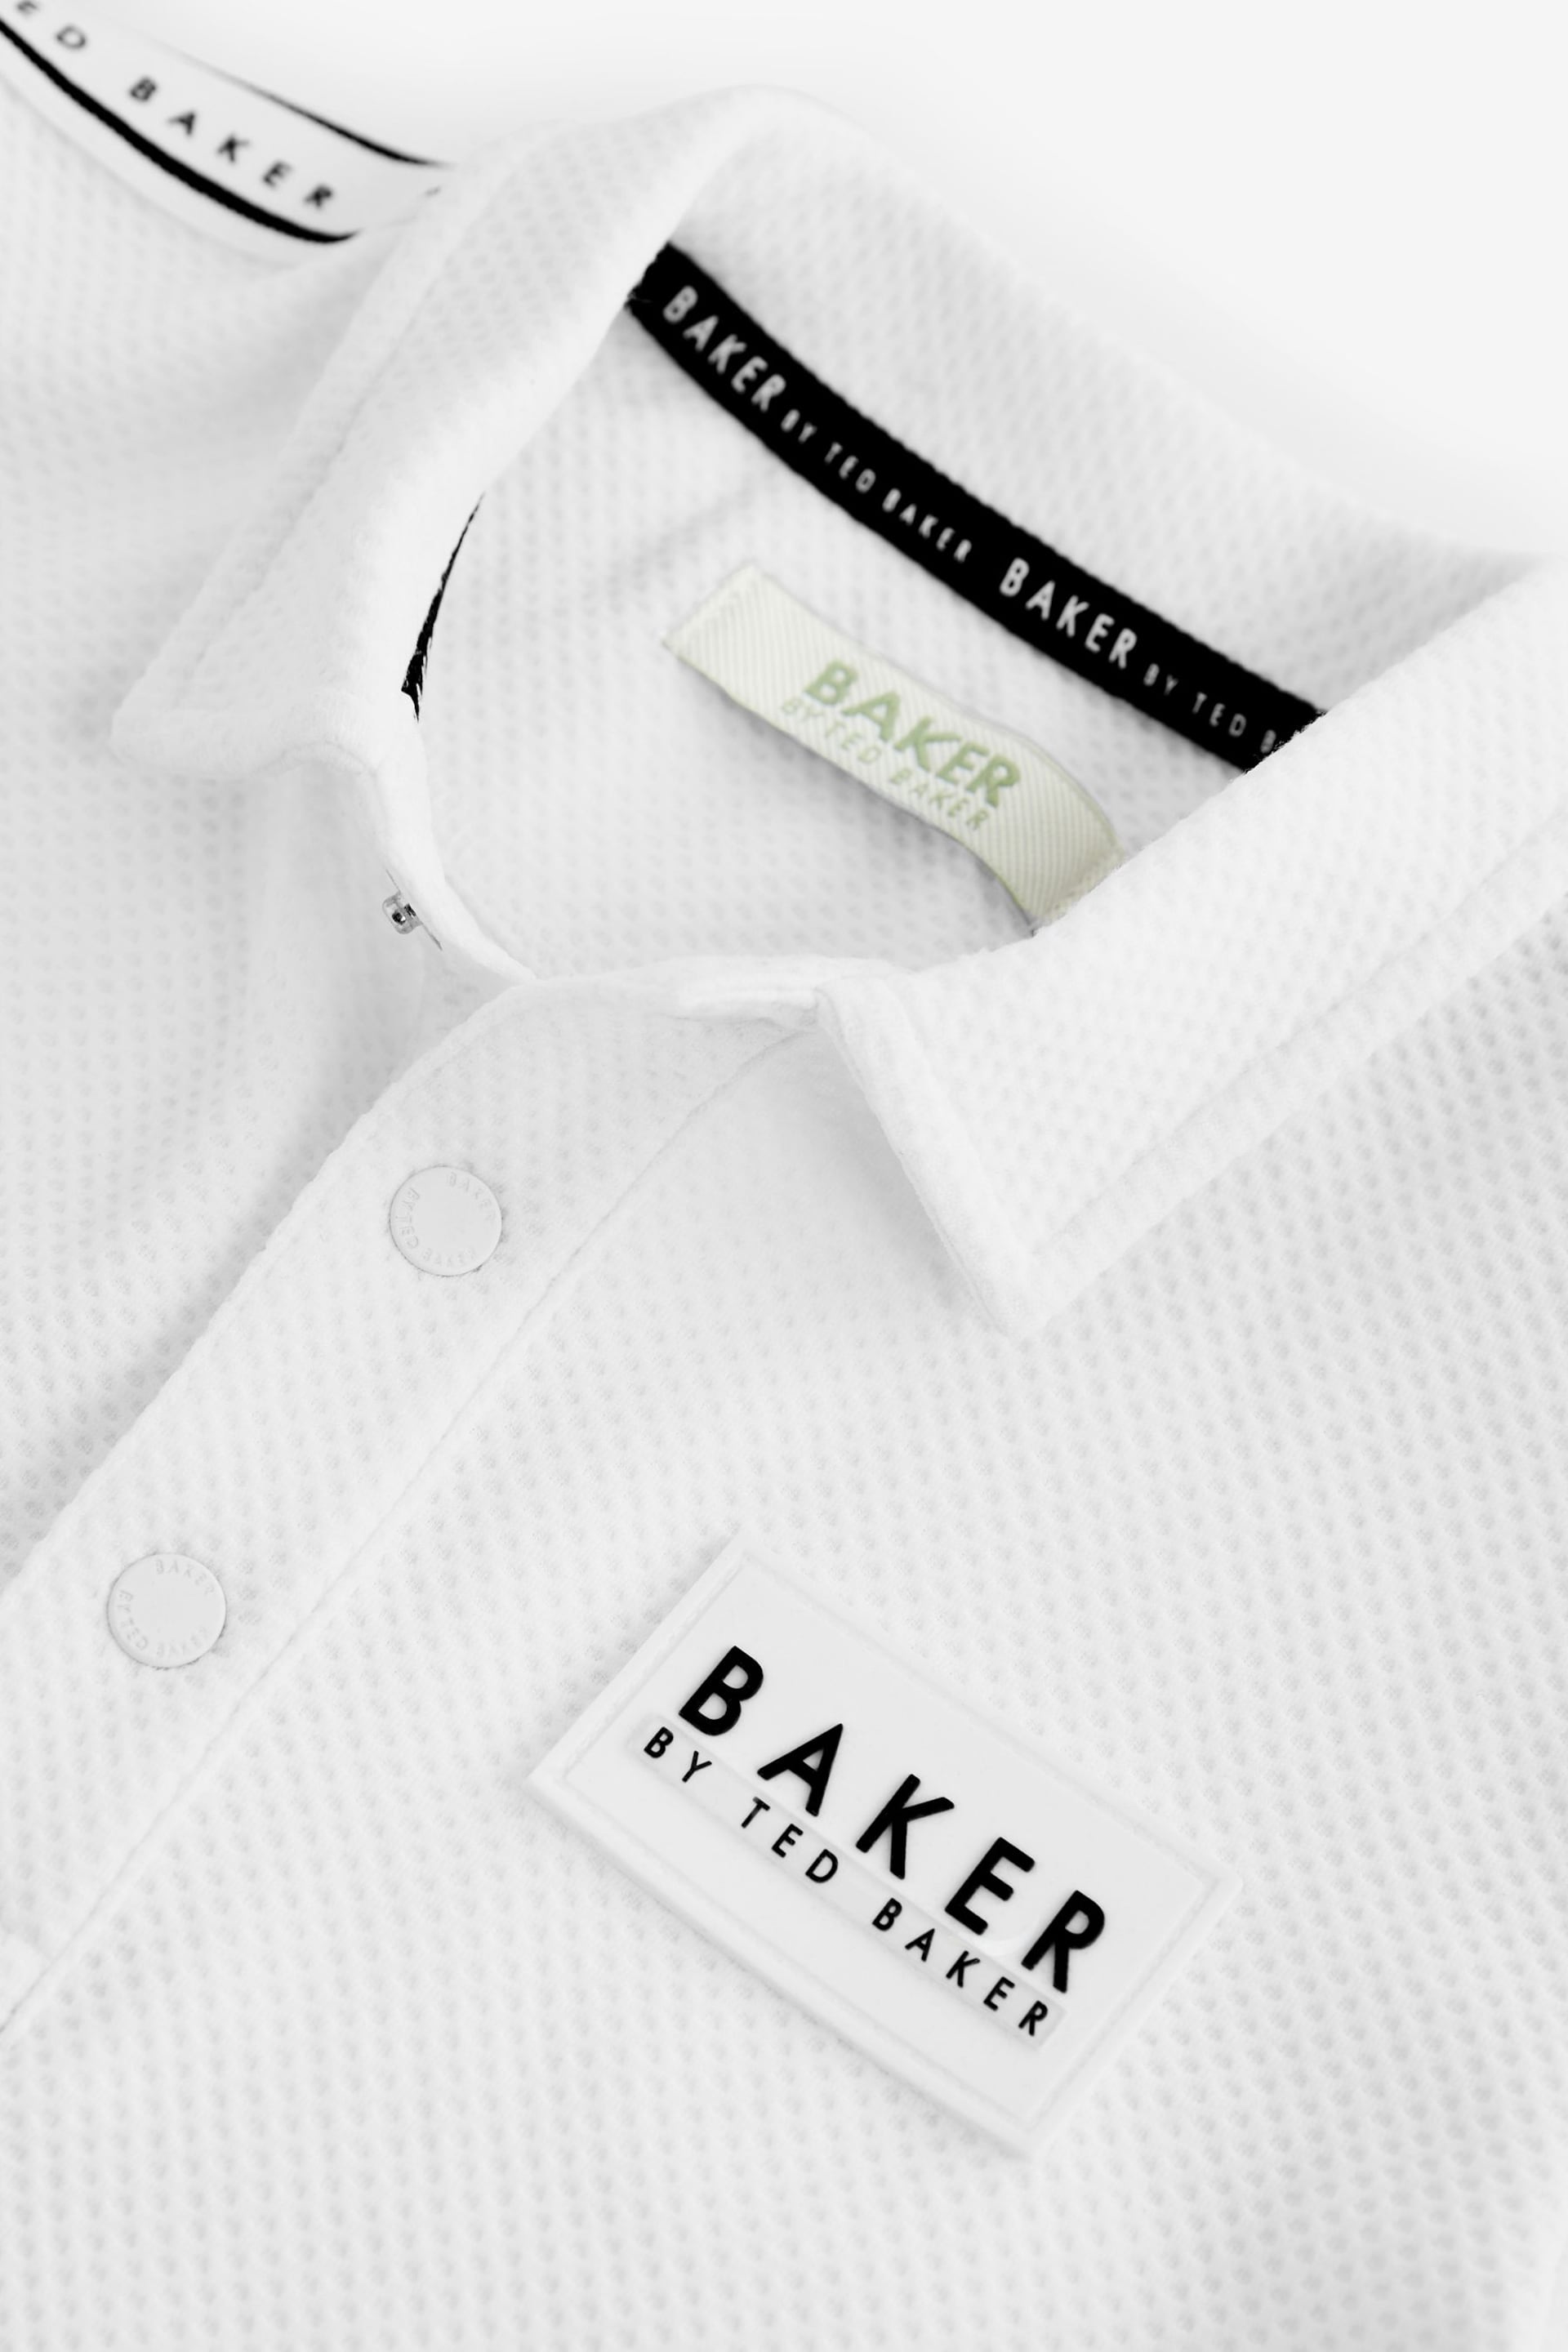 Baker by Ted Baker Textured White Polo Shirt - Image 9 of 10